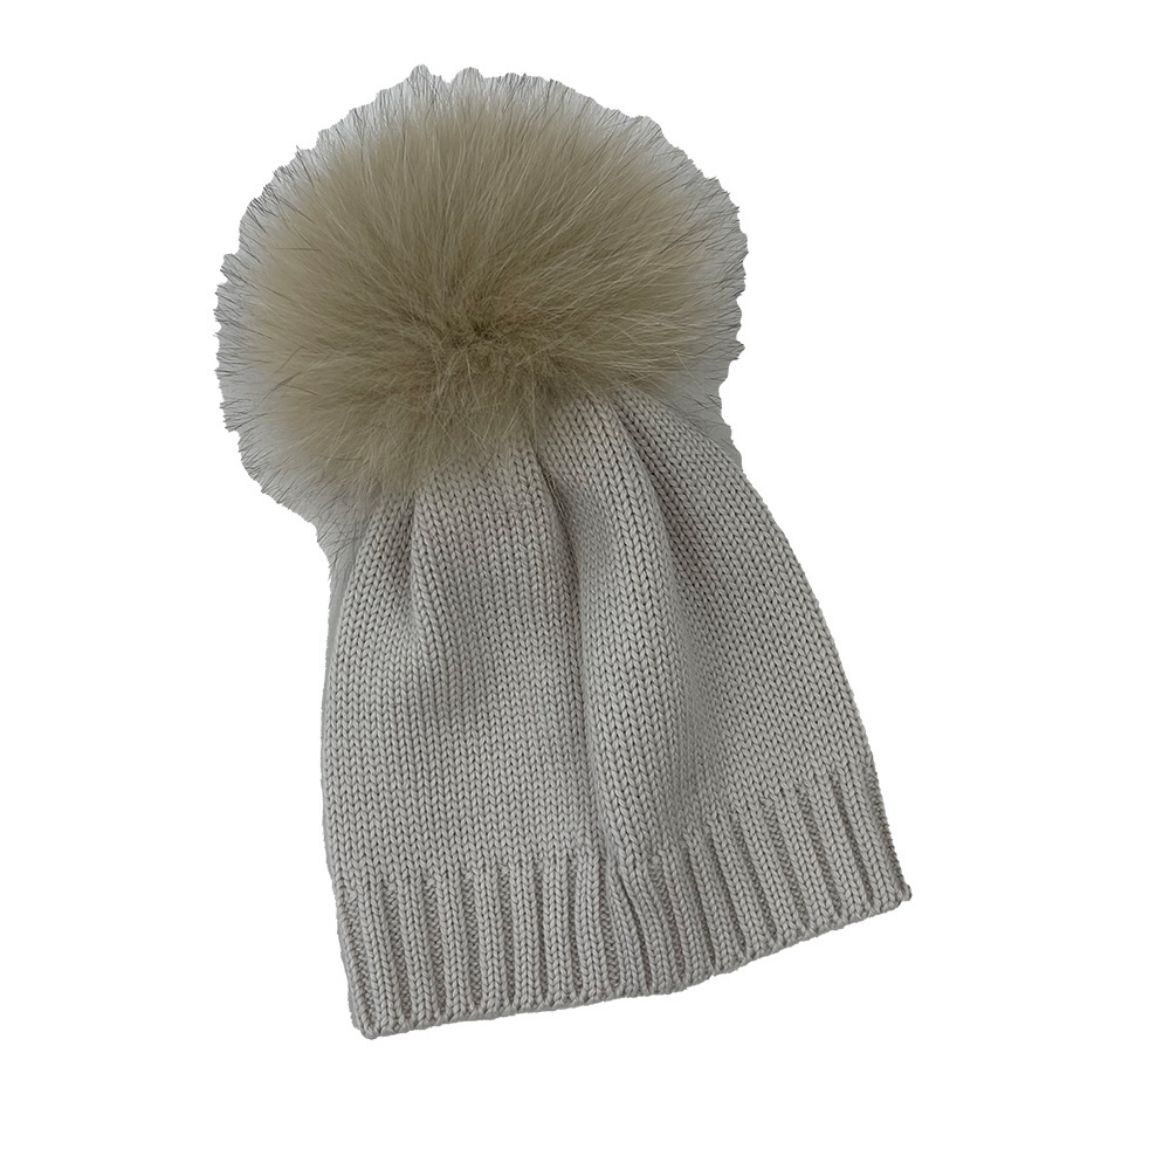 Picture of Bimbalo Boys Beige Knitted Hat with Fur Pom